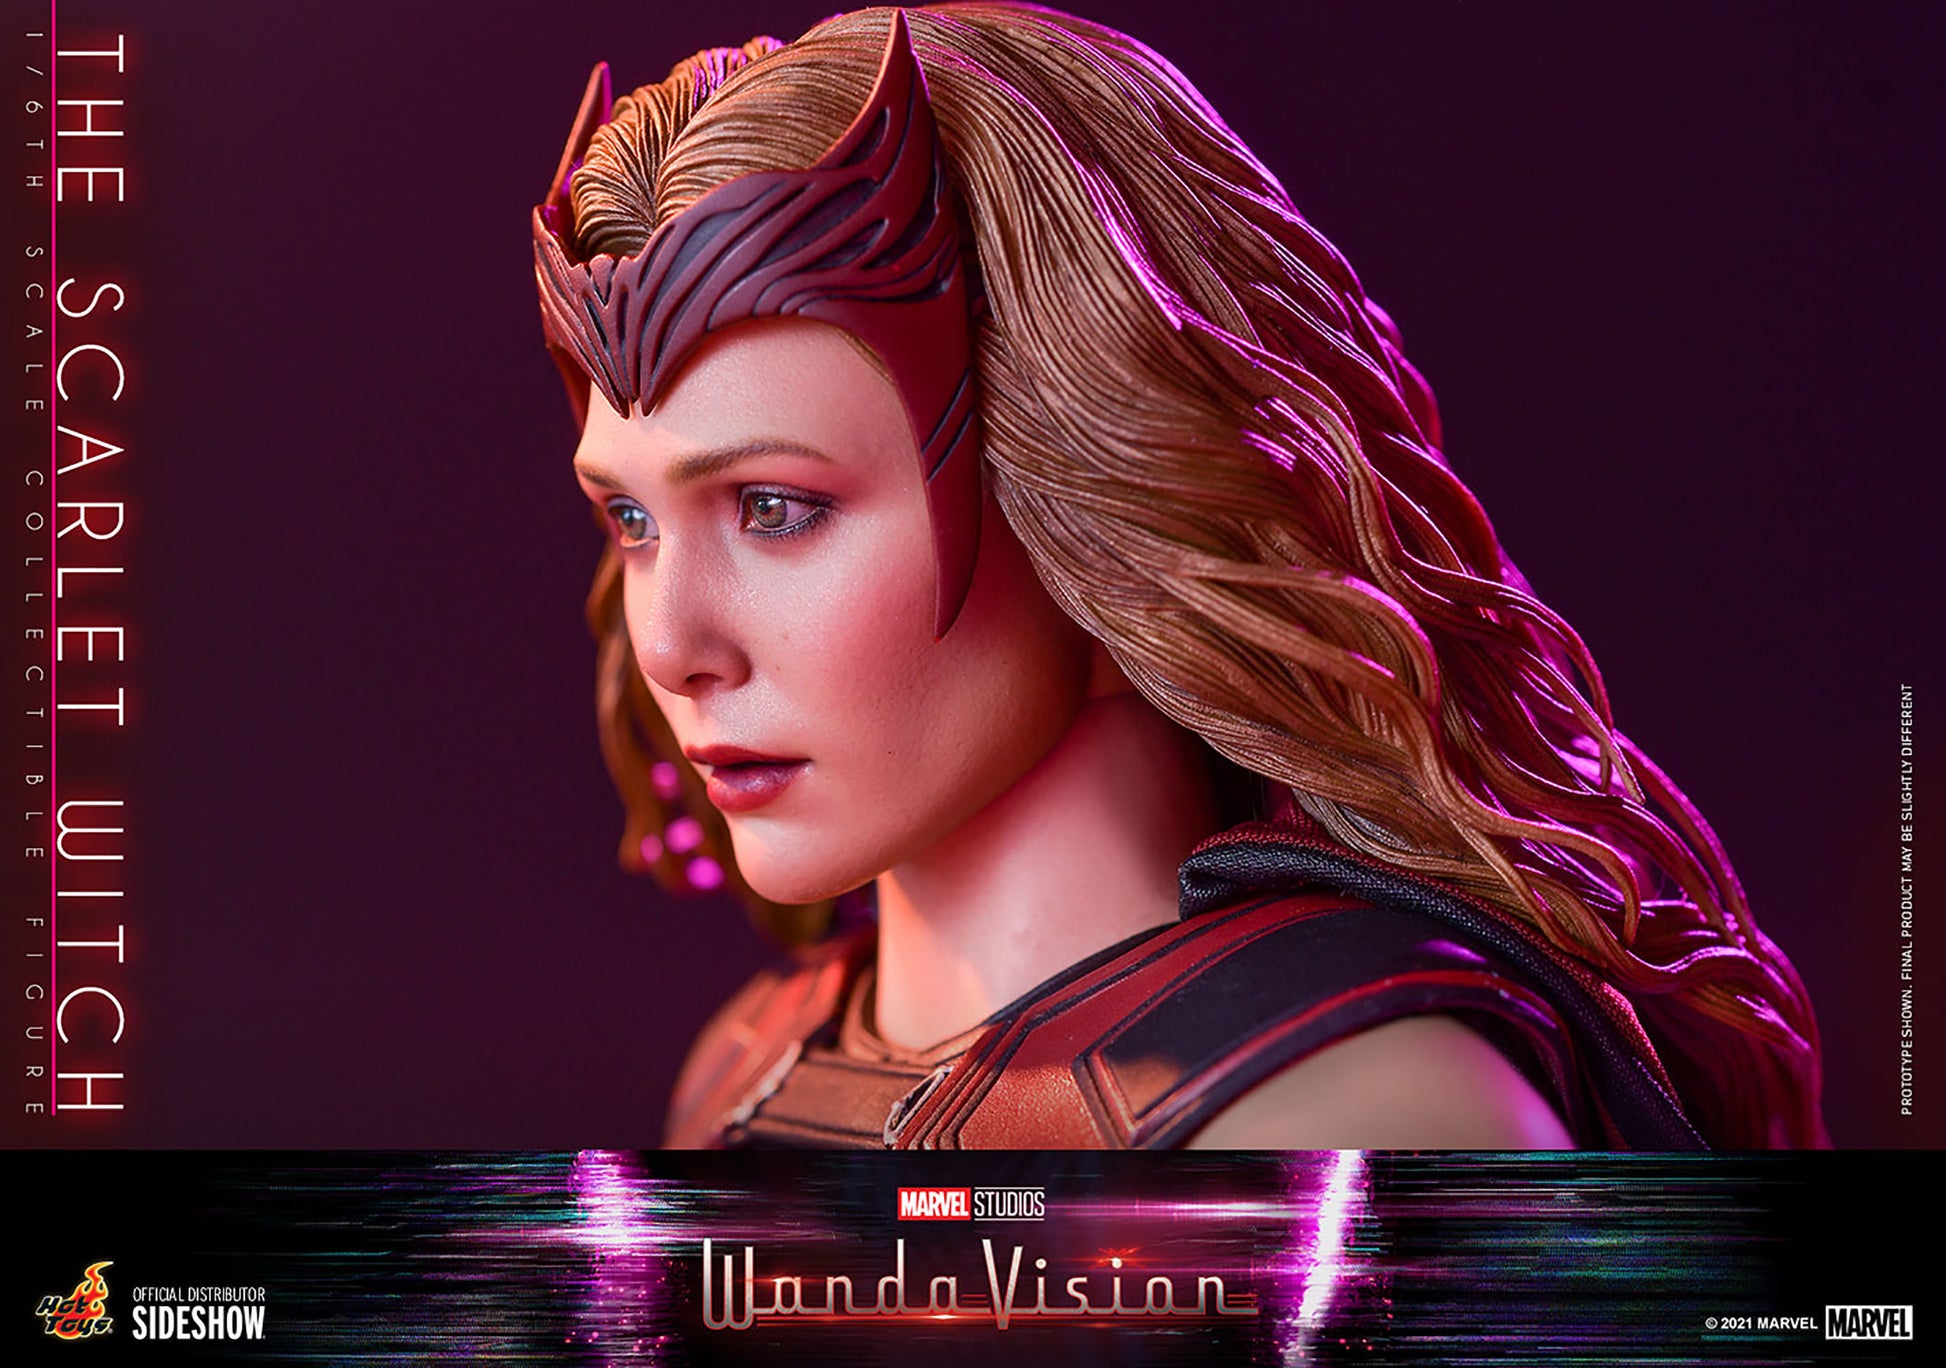 The Scarlet Witch Sixth Scale Collectible Figure by Hot Toys